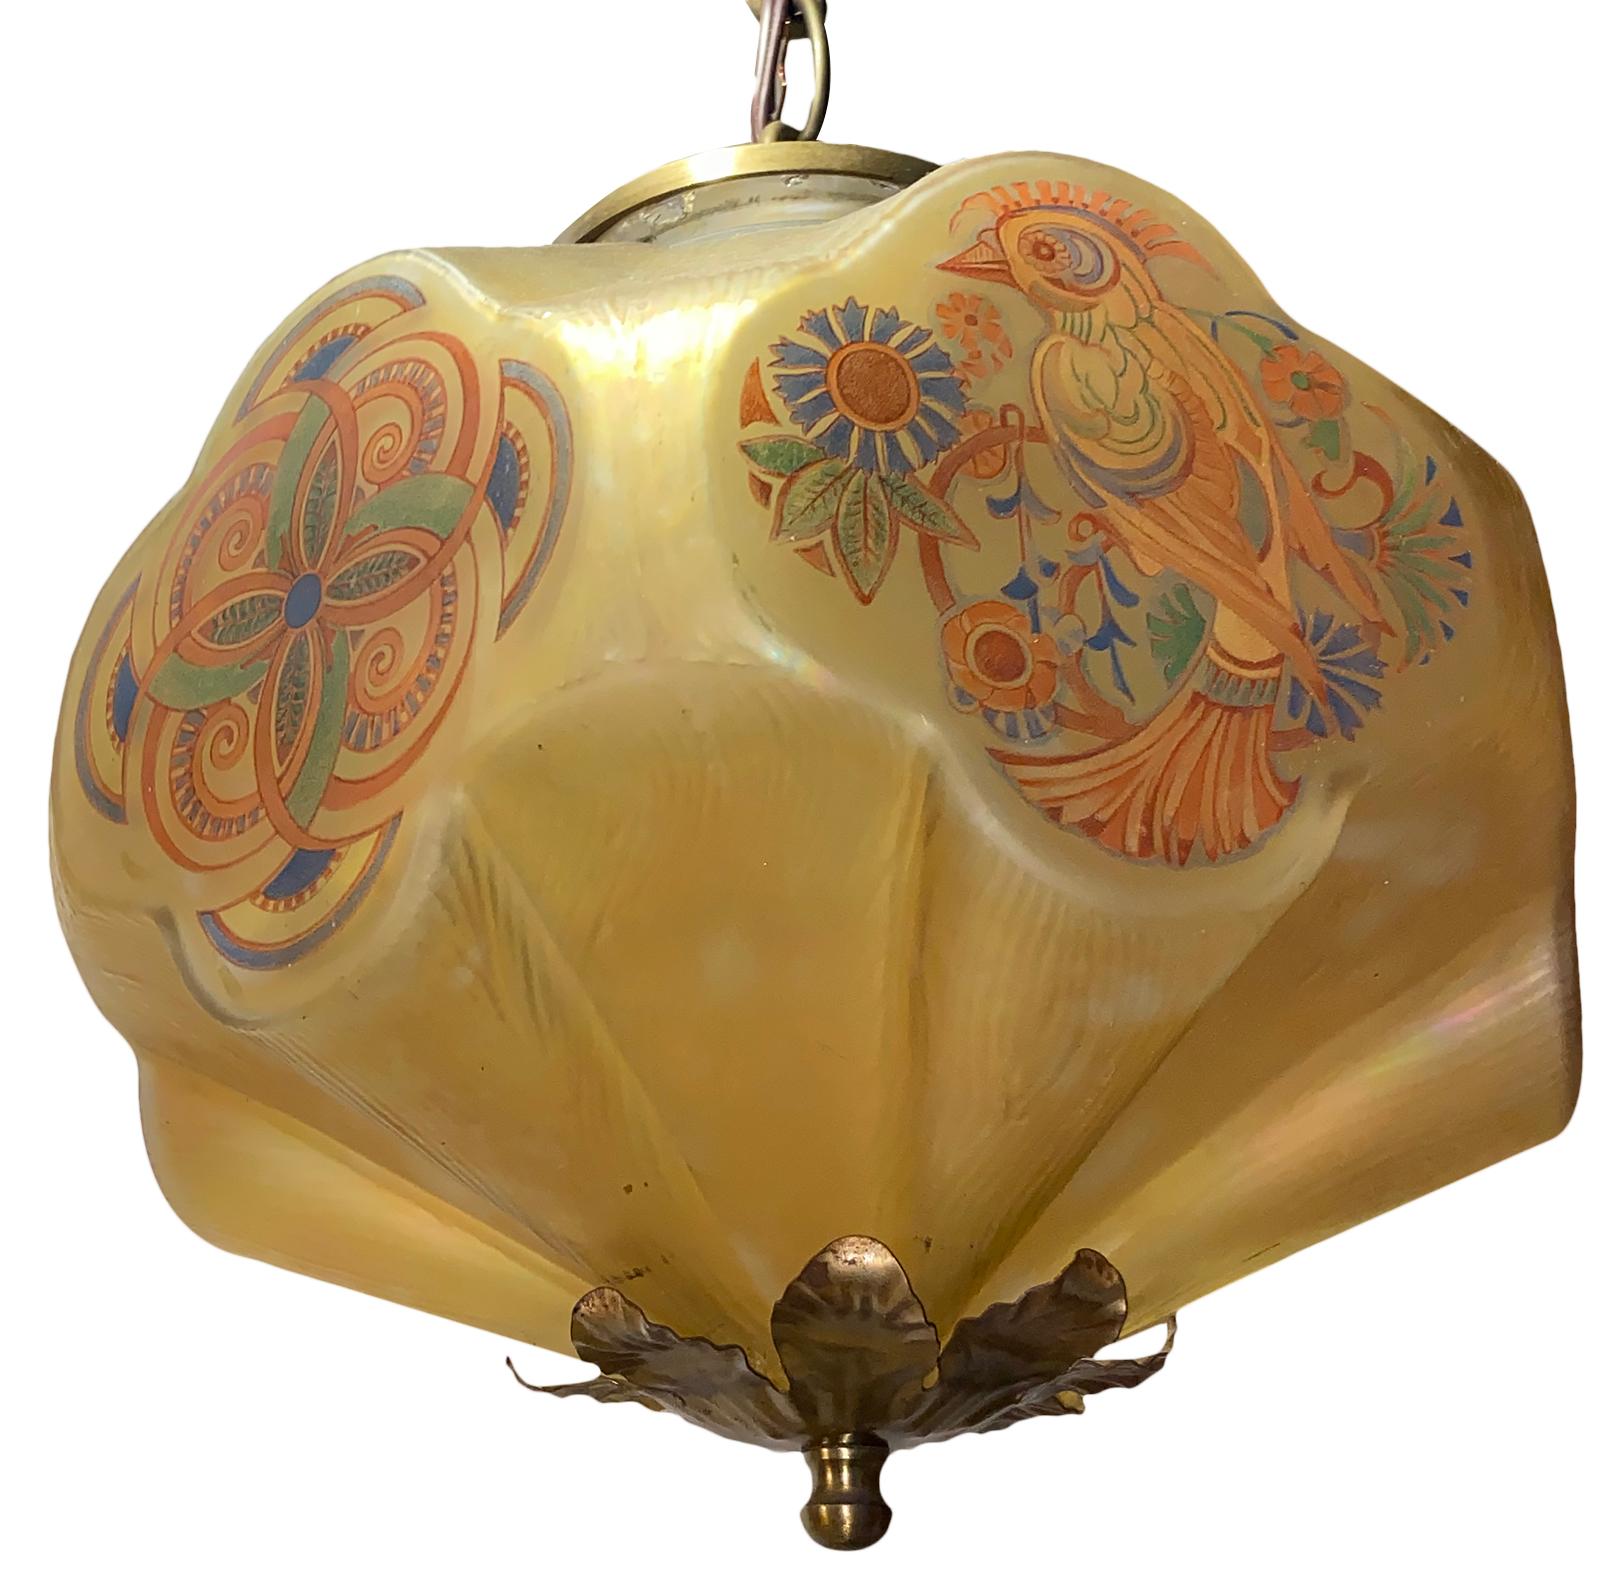 A circa 1940' Swedish art glass lantern with painted decoration.
Measurements:
Height: 11